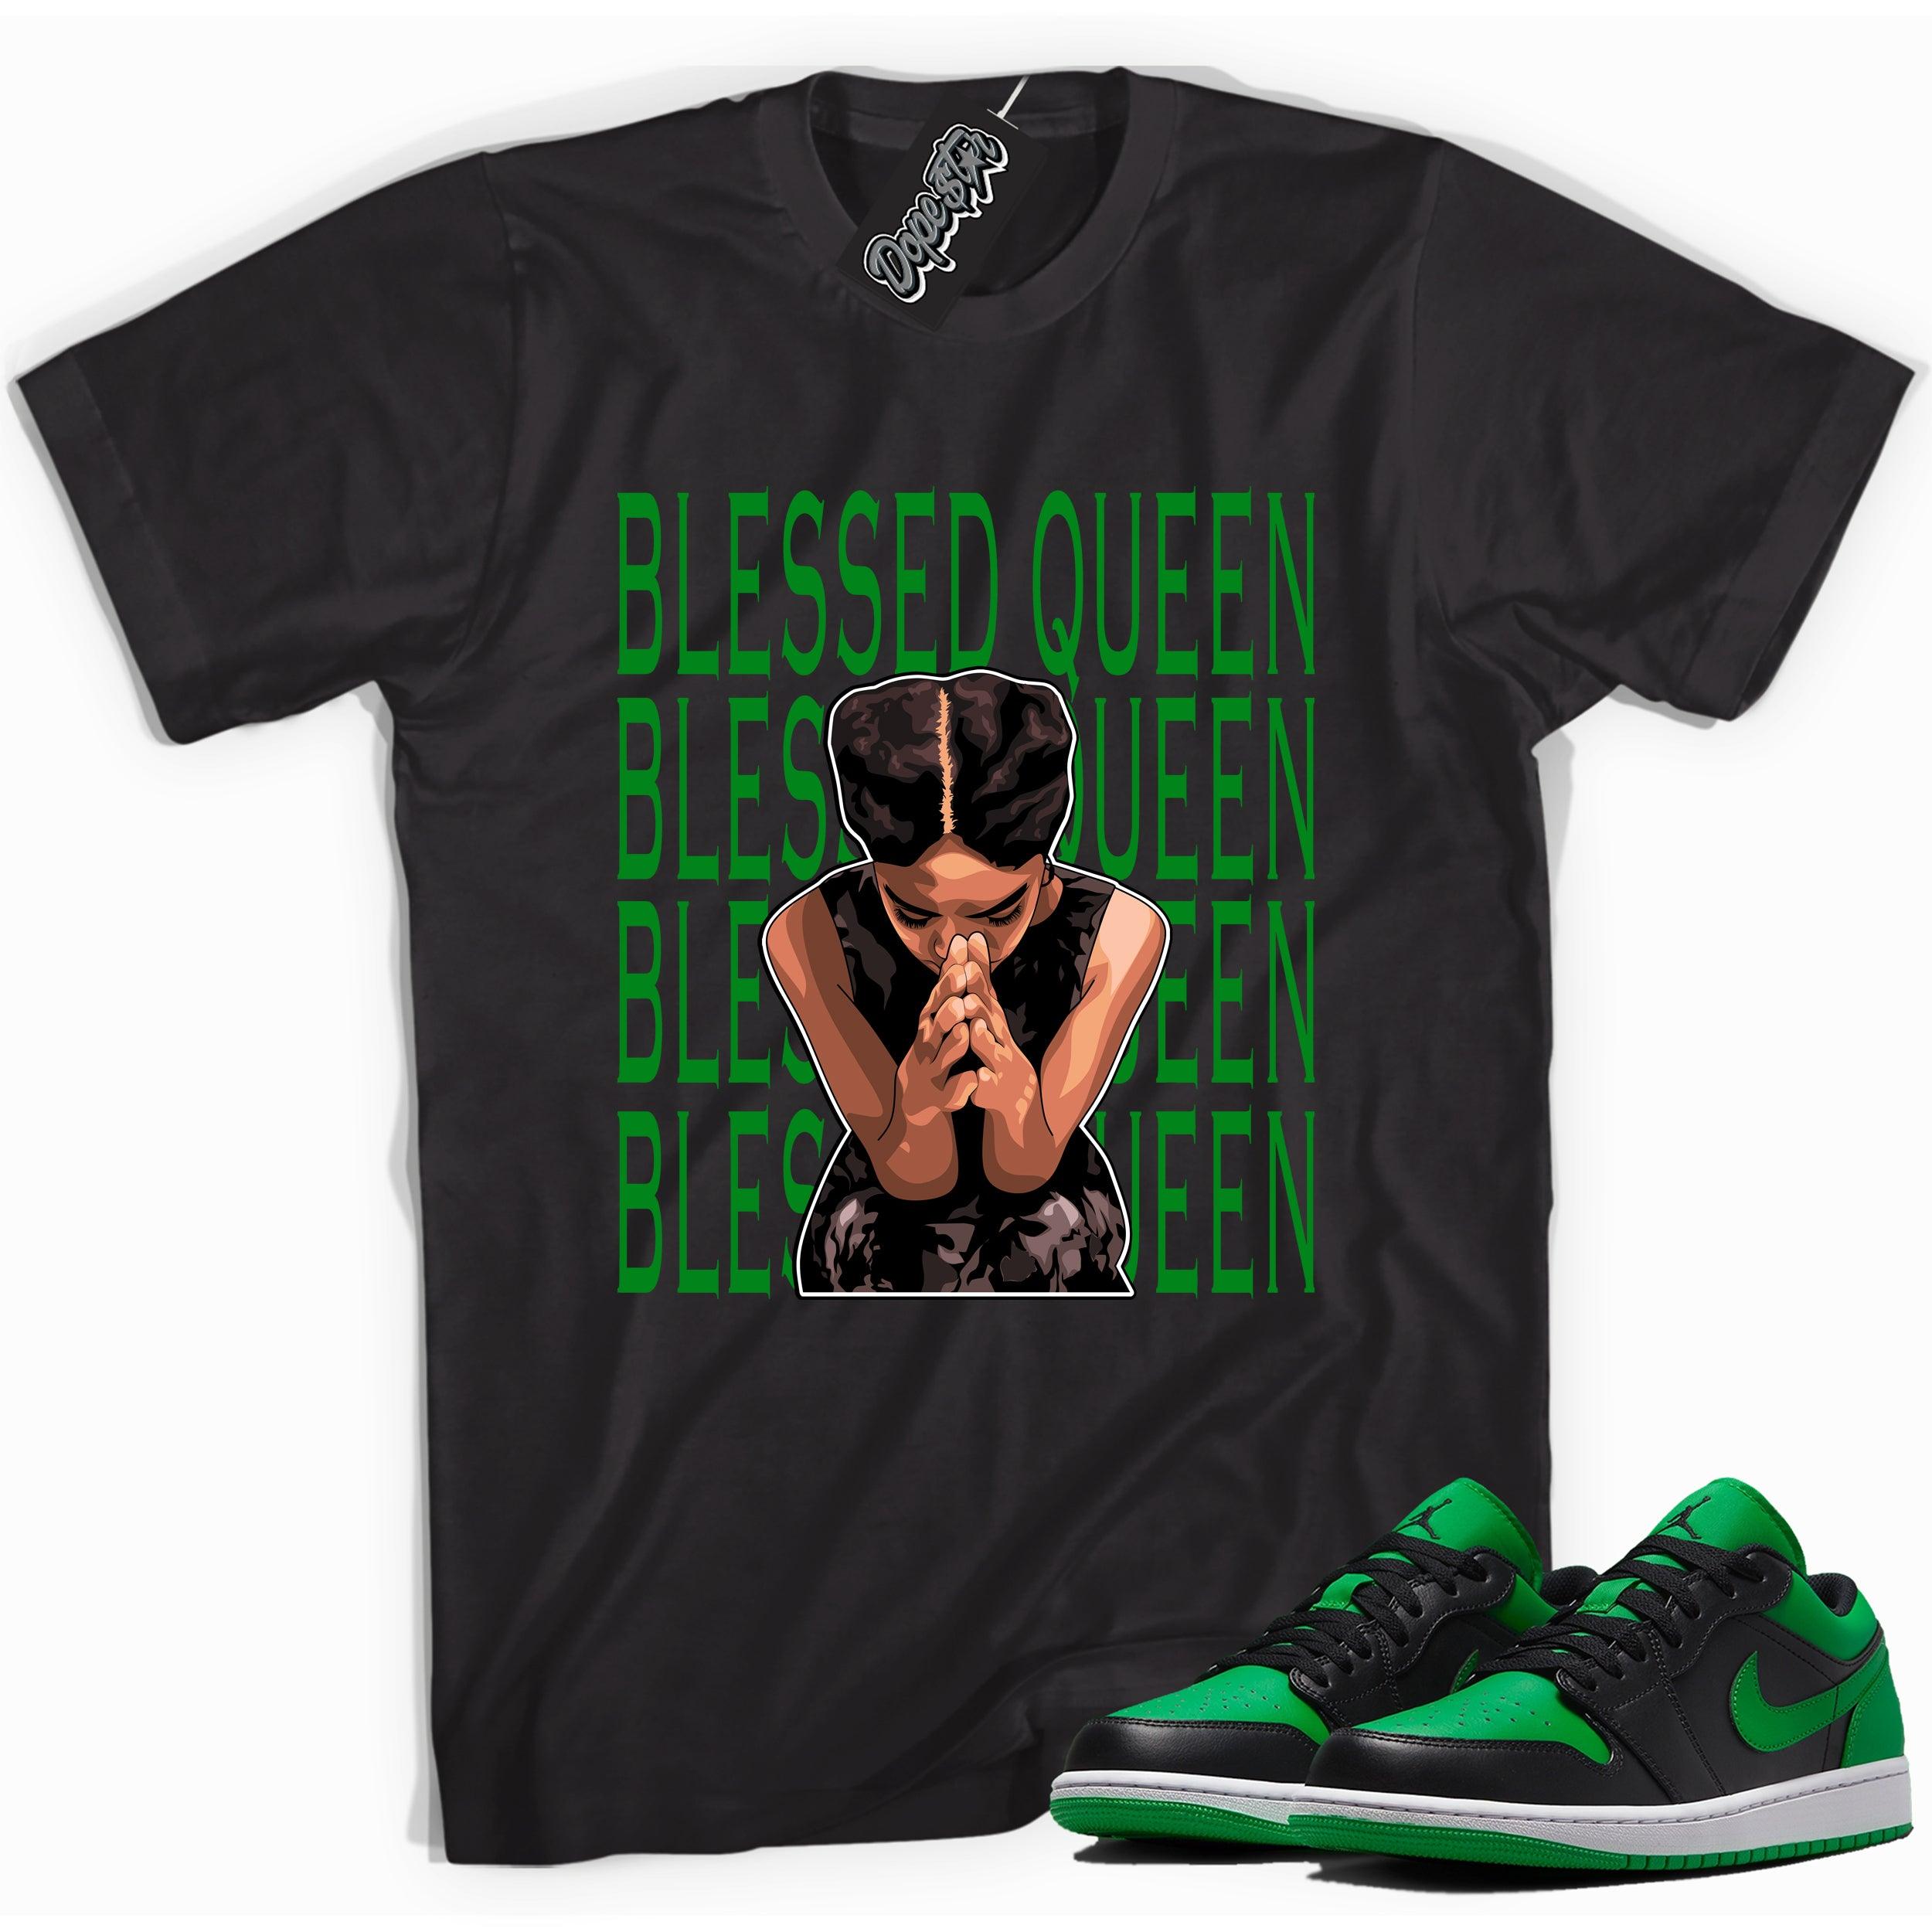 Cool black graphic tee with 'Blessed Queen' print, that perfectly matches Air Jordan 1 Low Lucky Green sneakers